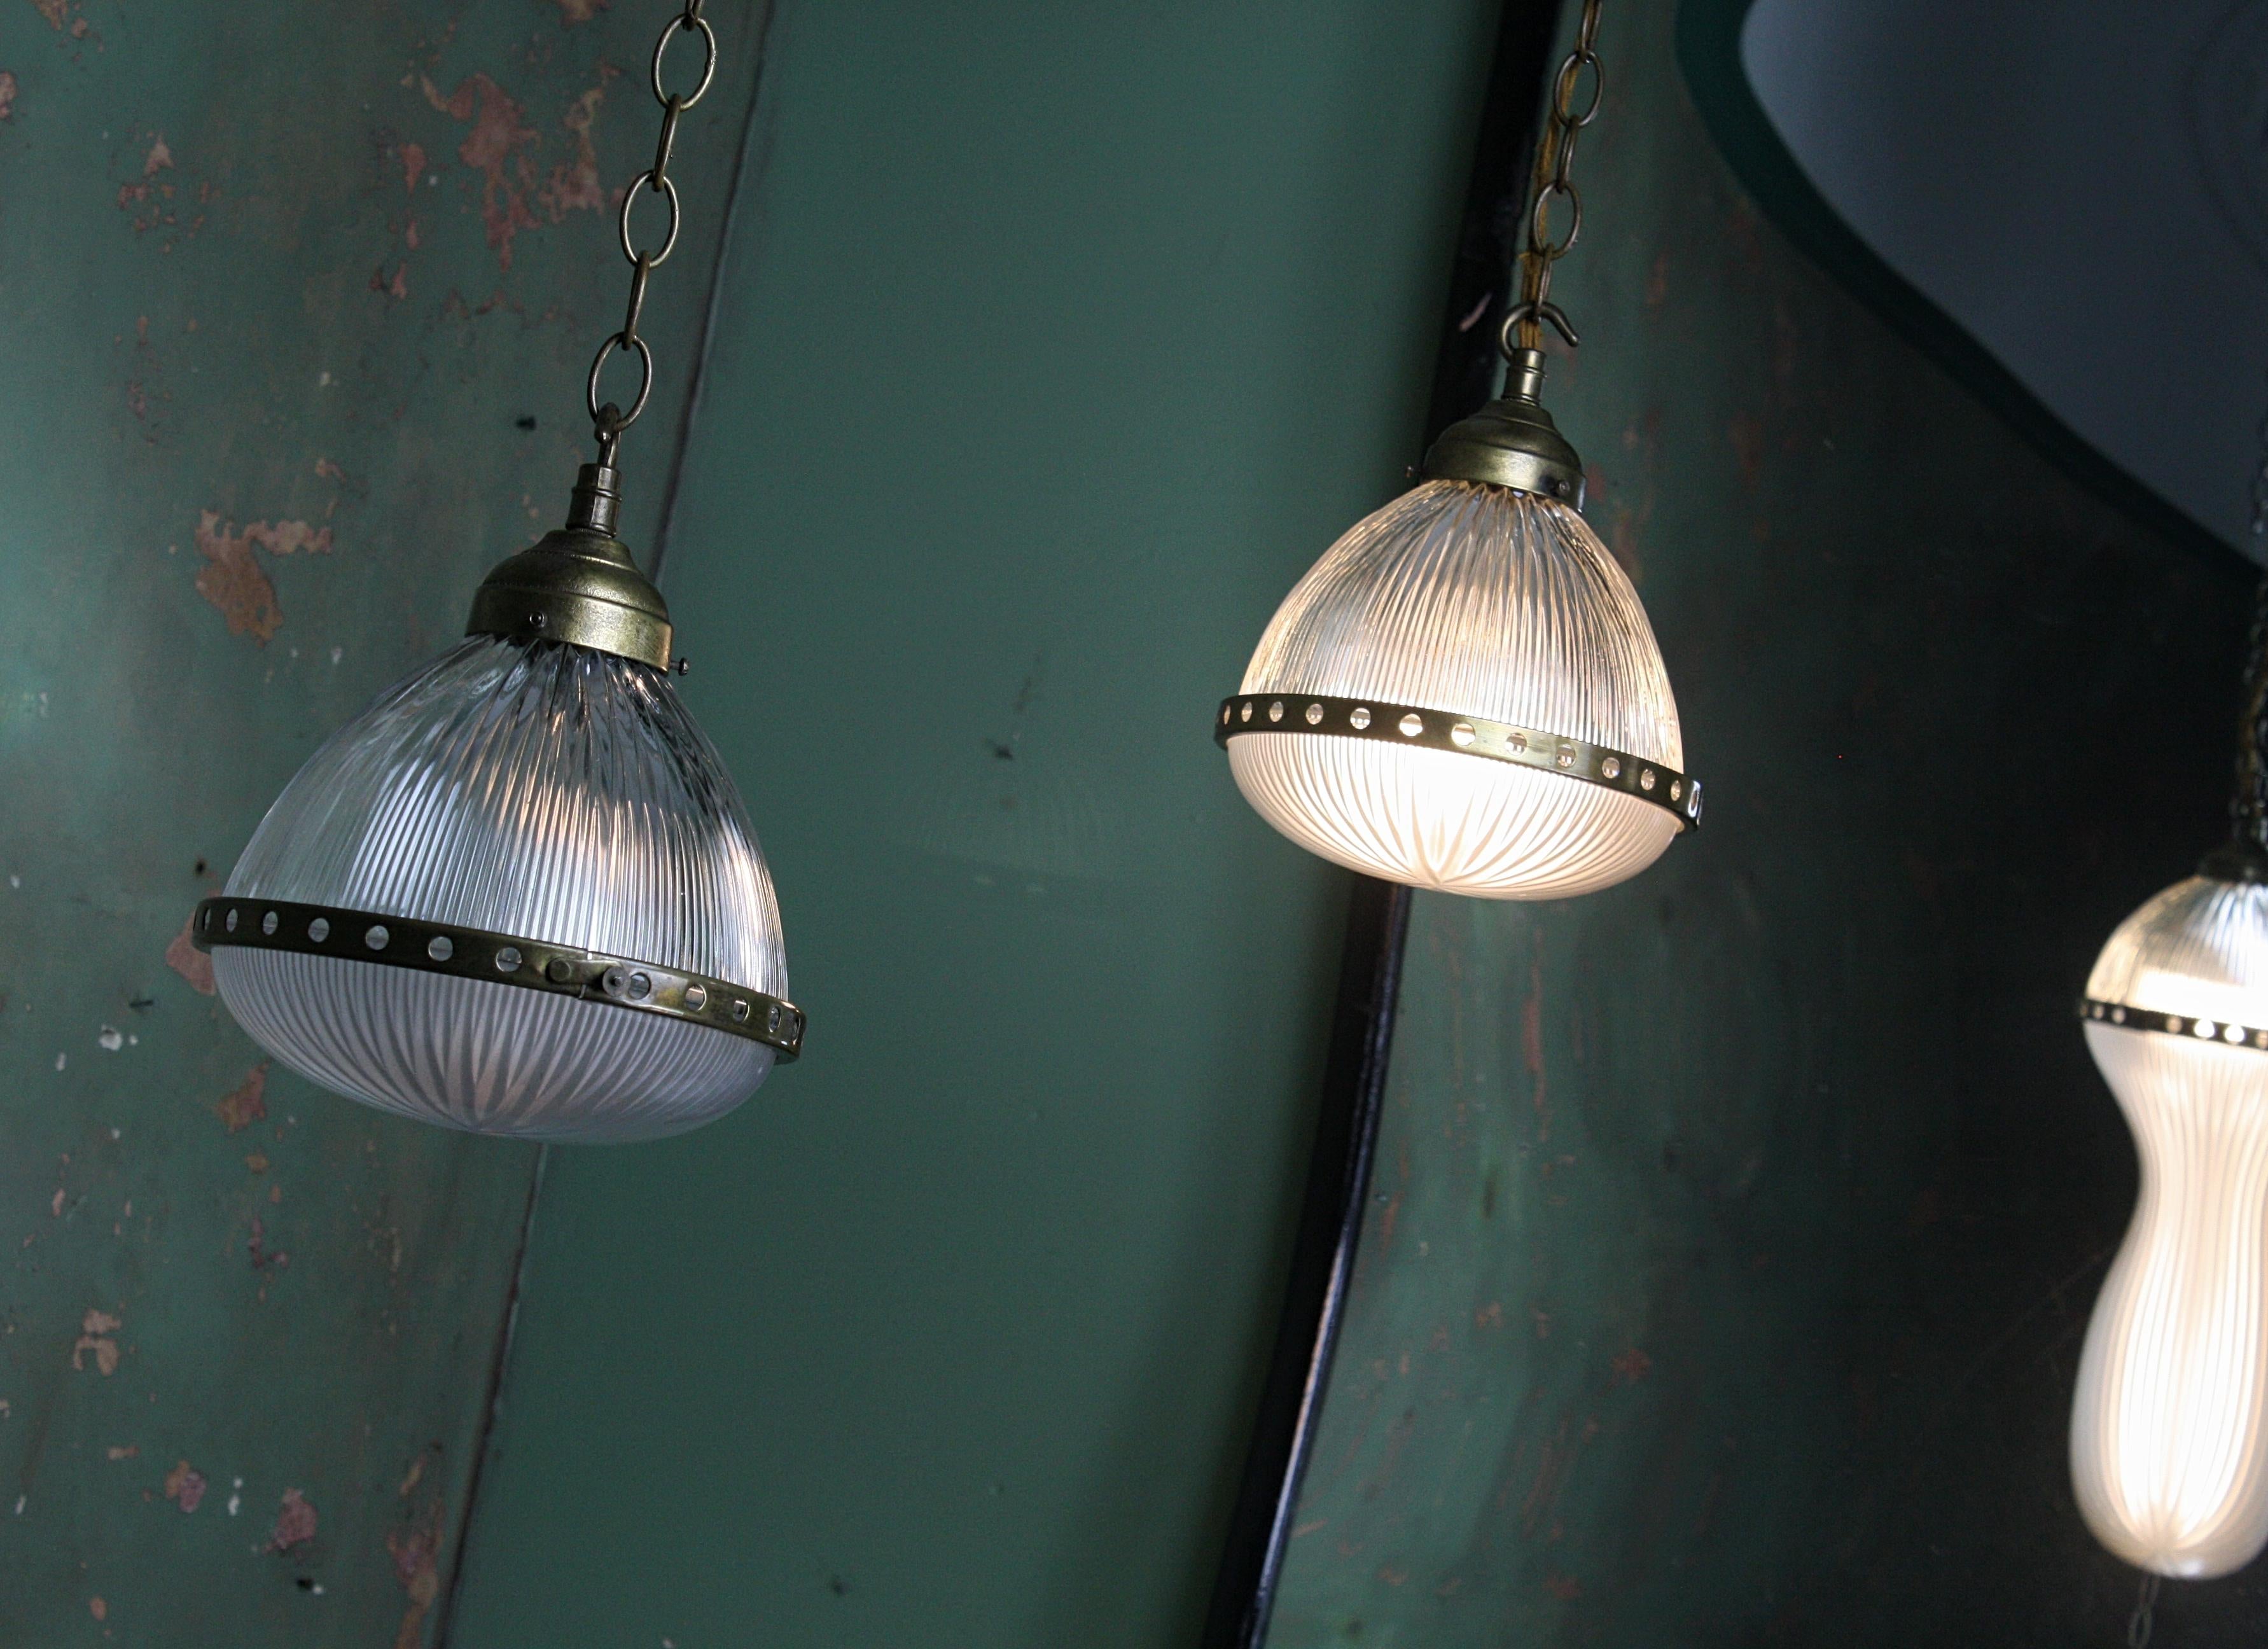 A fine pair of petite two part Holophane pendants, with heavy gauge cast galleries, brass central collar and age related brass chain, early 20th century.

Fine prismatic cut glass, with the Holophane stamp and model number, each light comes with